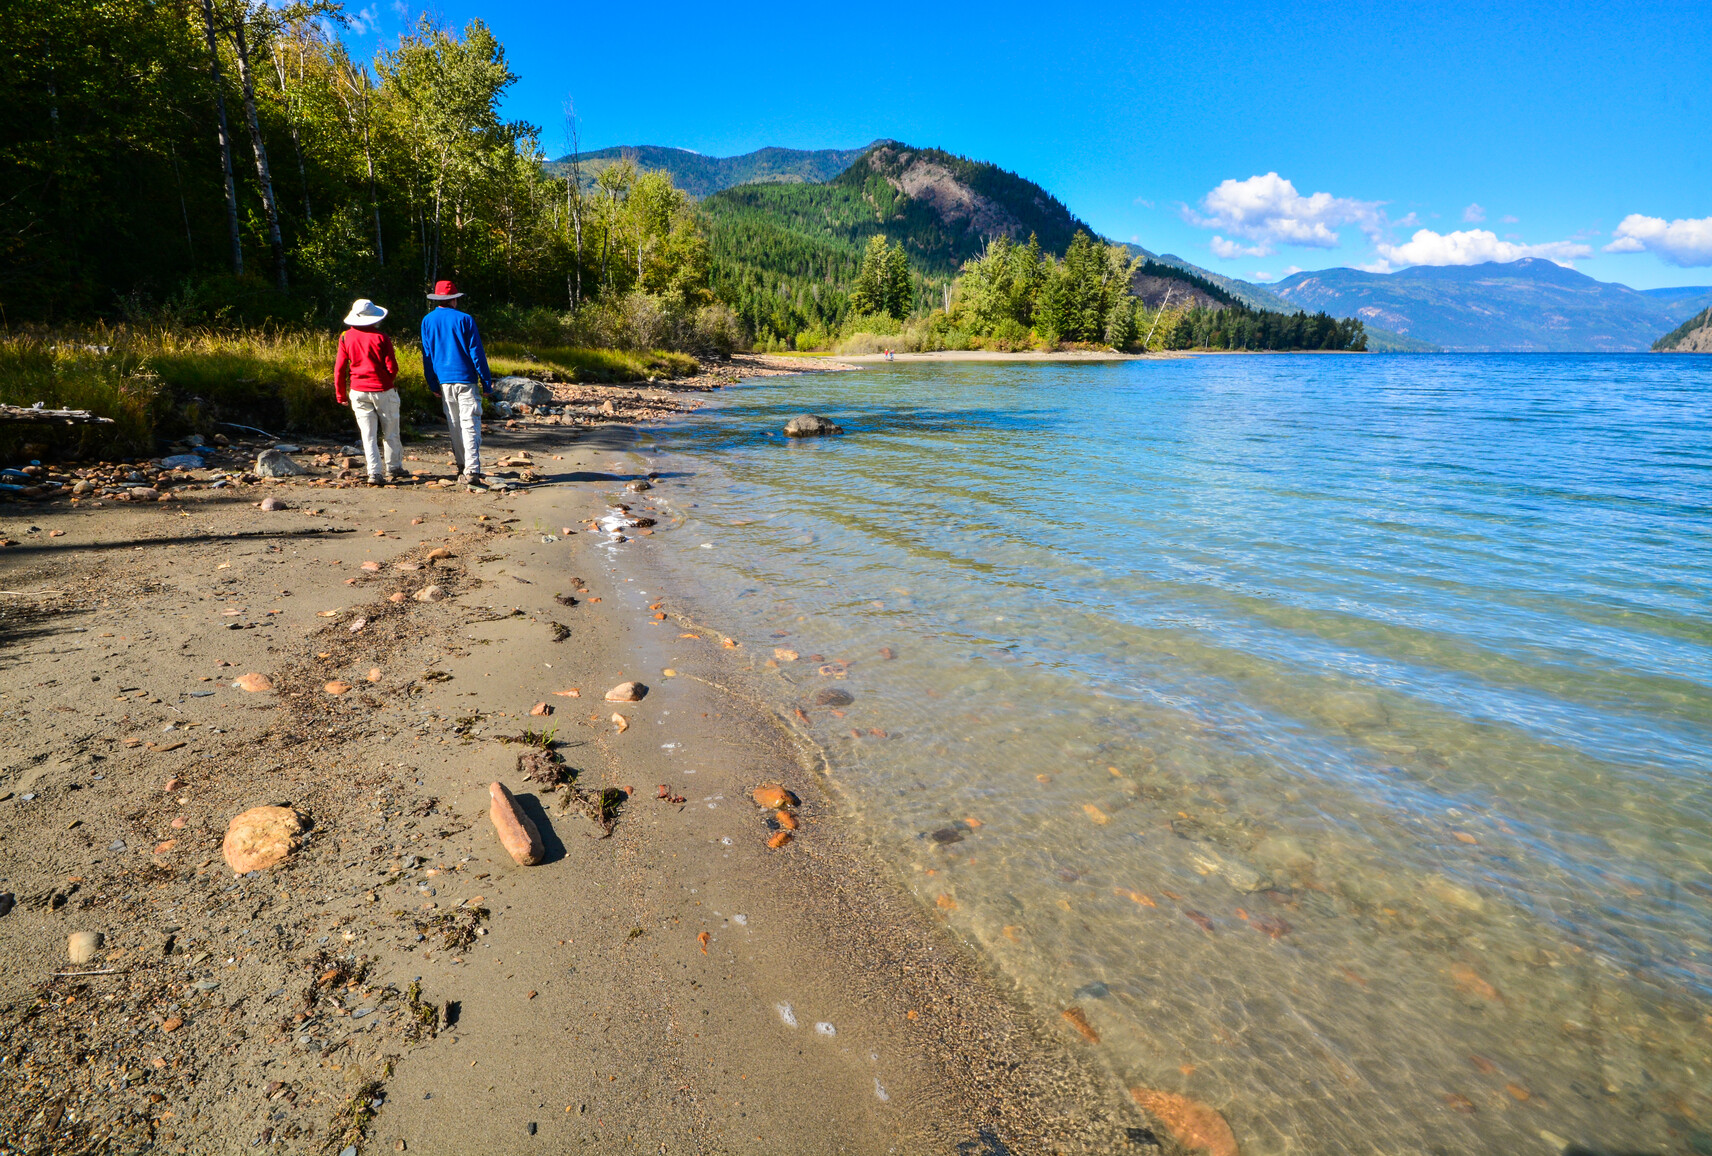 Two park visitors walk along the shore of Adams Lake and enjoy the view of the mountains and forest.